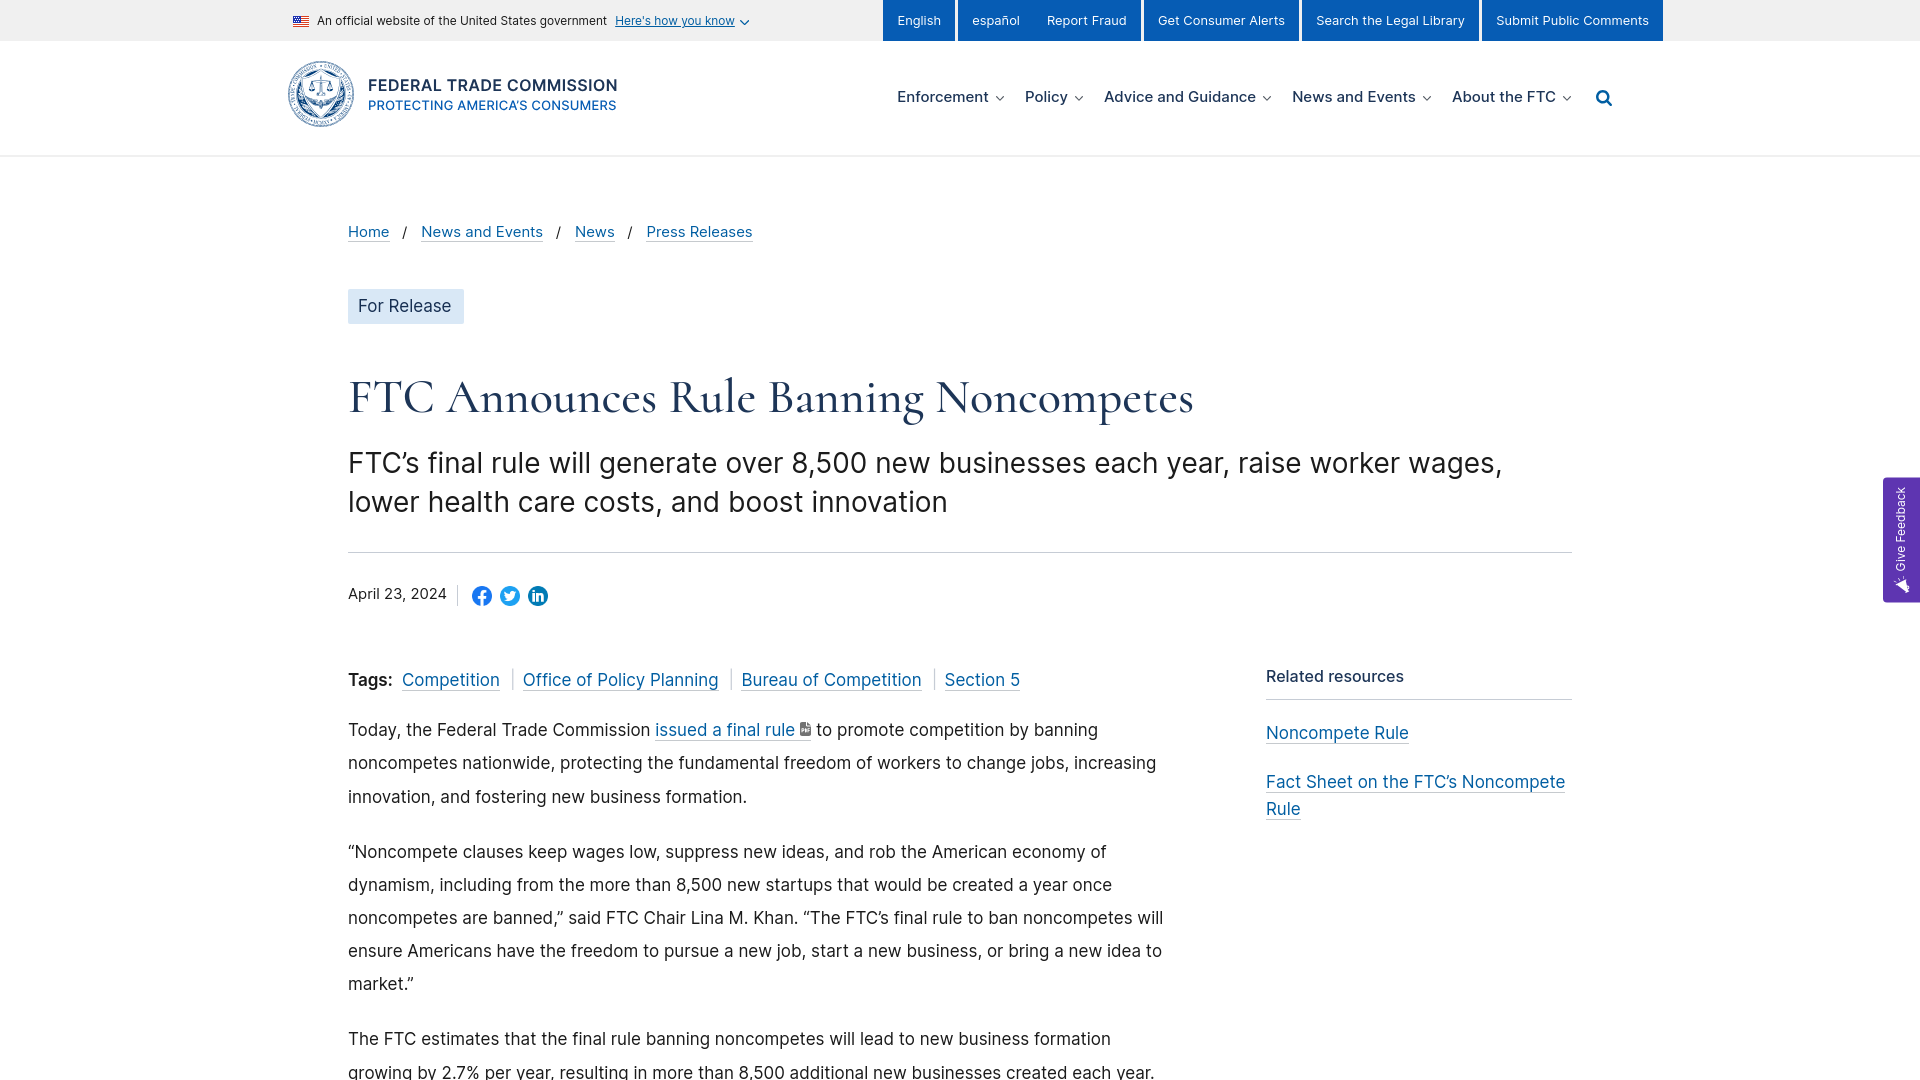 FTC Announces Rule Banning Noncompetes | Federal Trade Commission